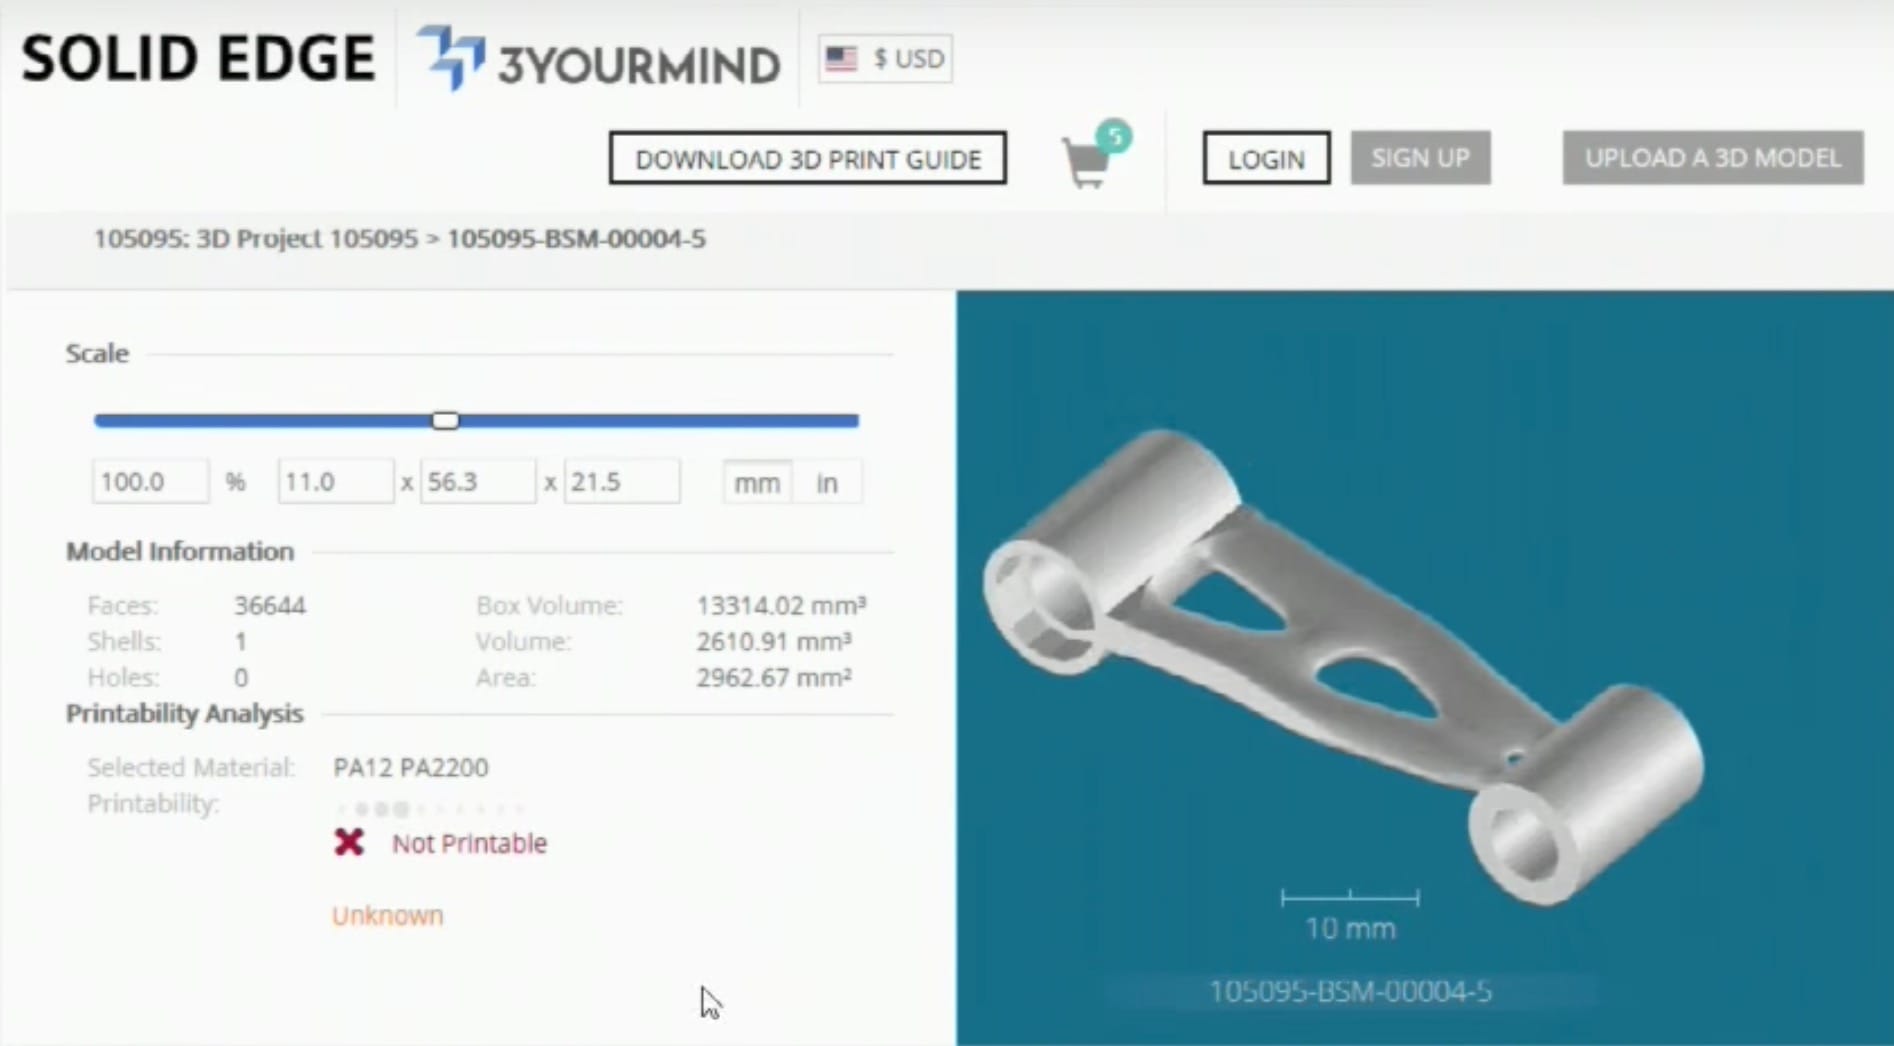  3YOURMIND is now integrated directly into Solid Edge 